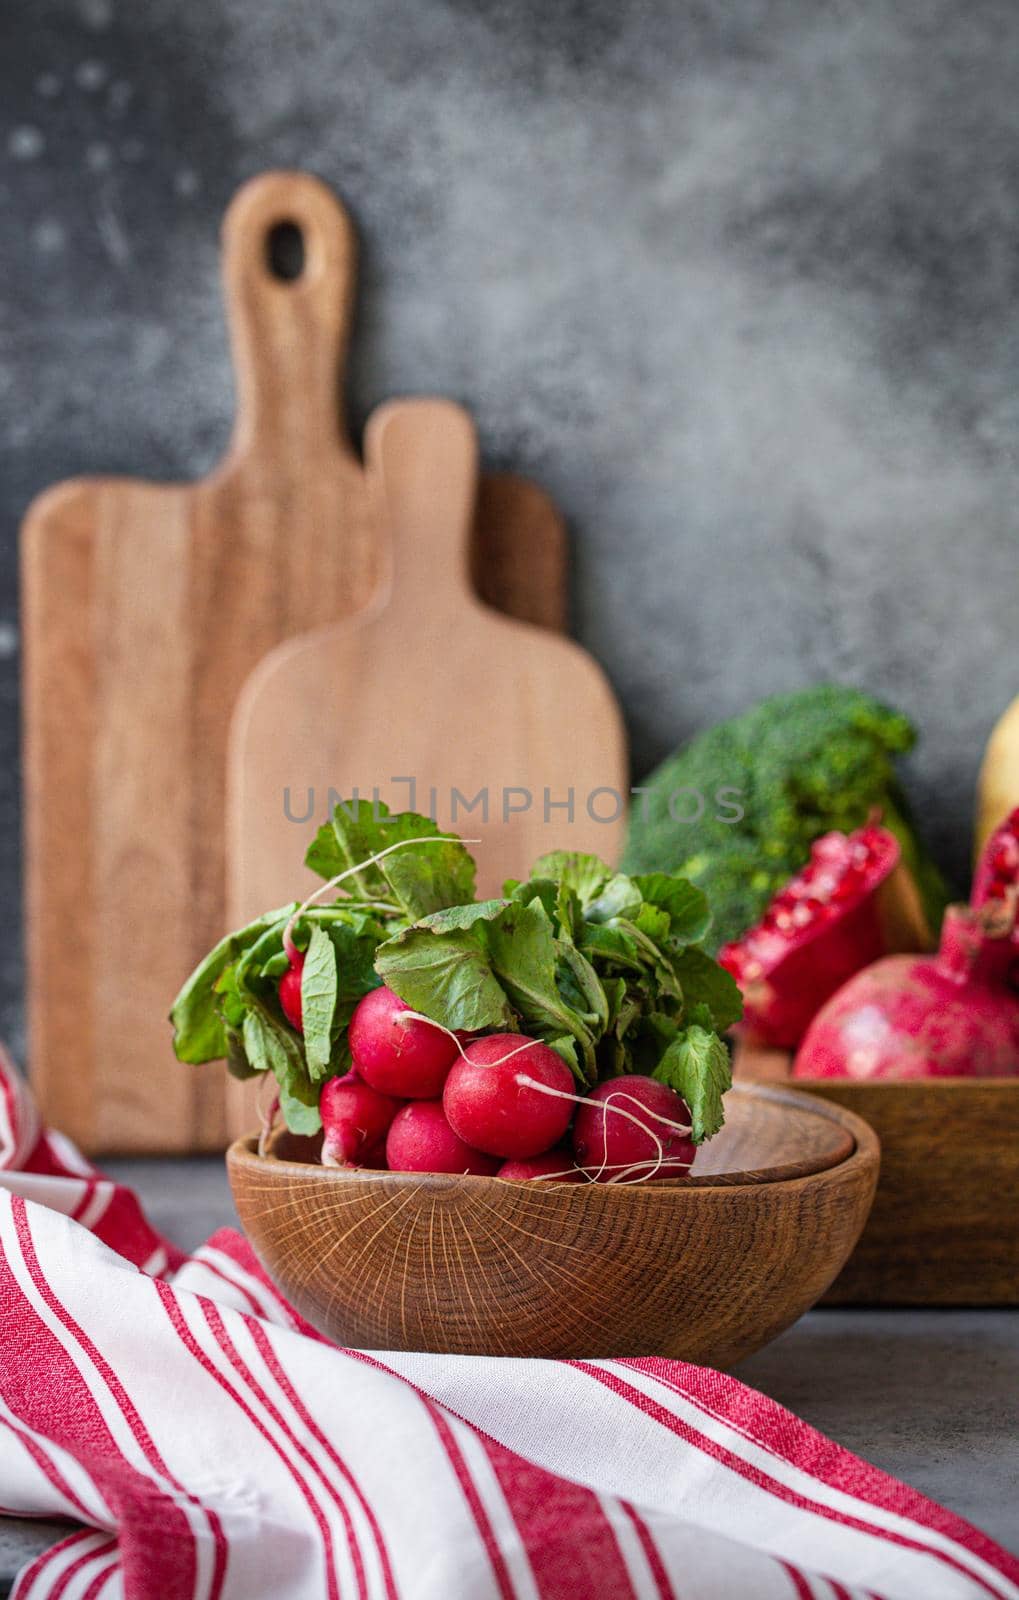 Radish bunch with fruit and veggies on kitchen table by its_al_dente